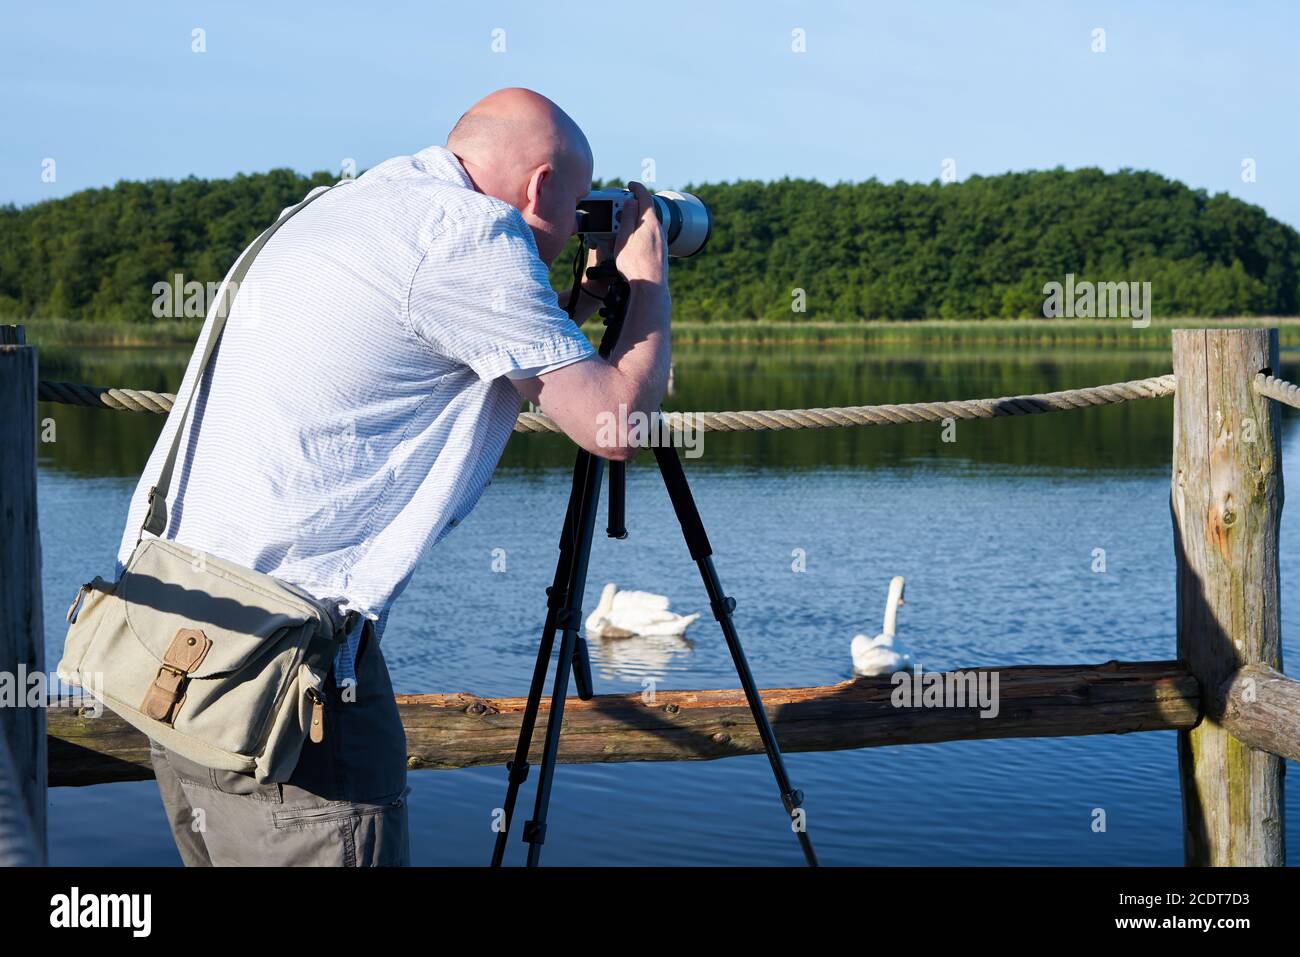 Photographer on a lake in the Mueritz National Park in Germany Stock Photo